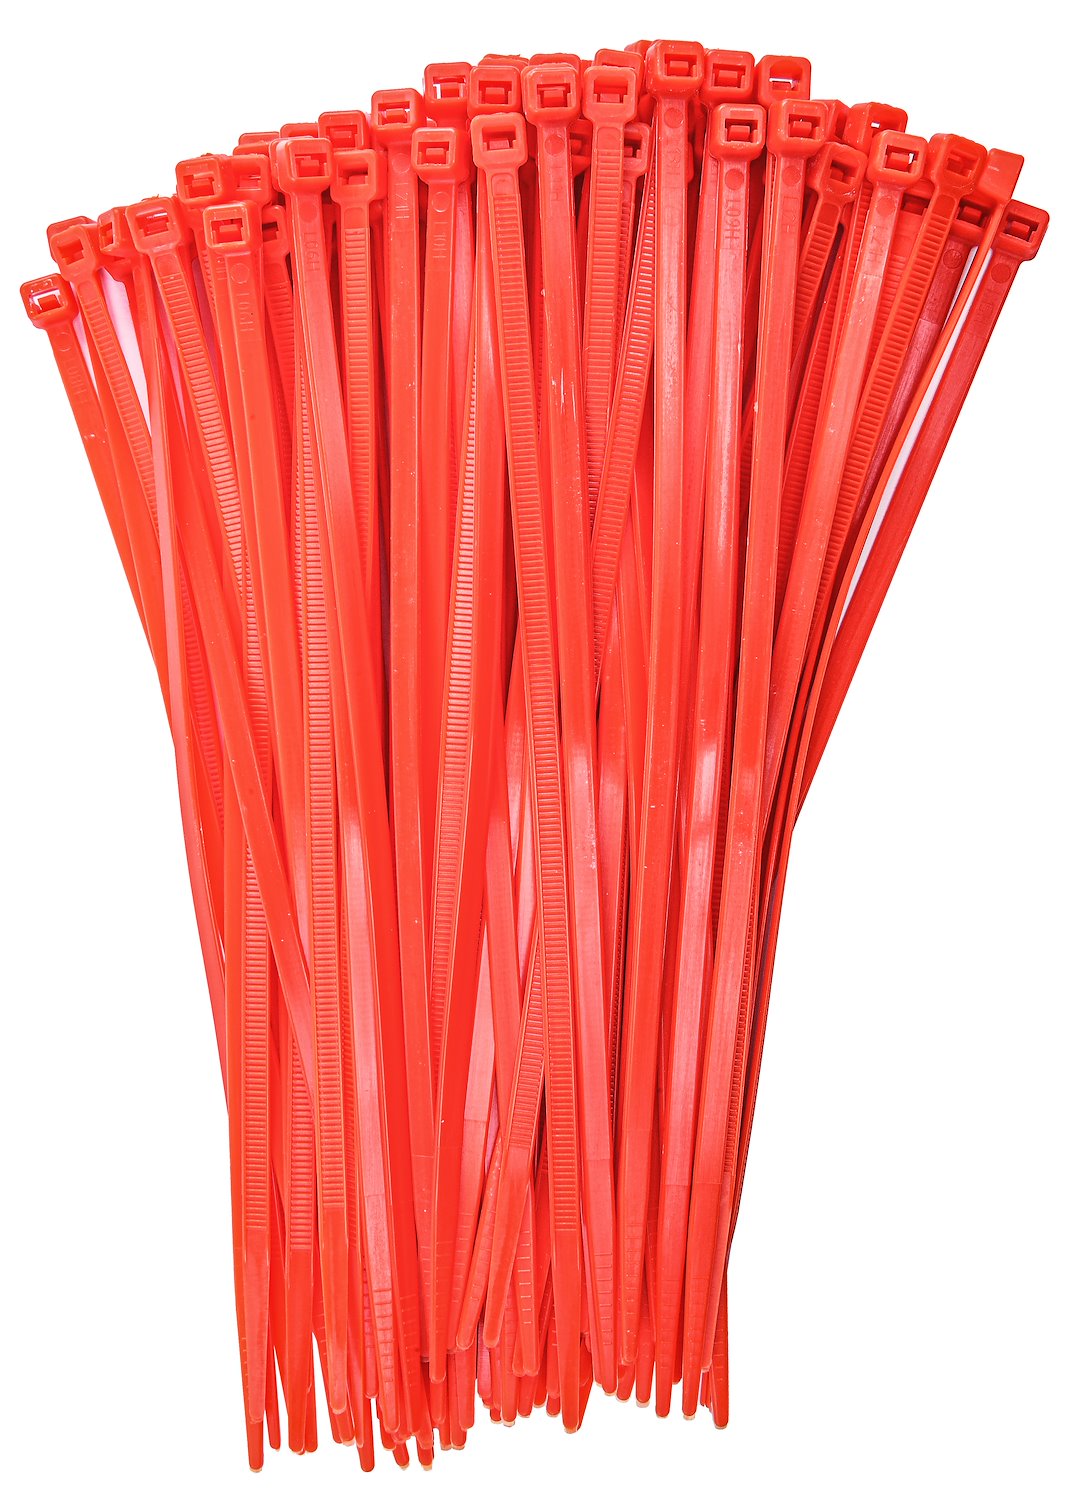 Nylon Wire and Cable Ties [8 in. Orange]